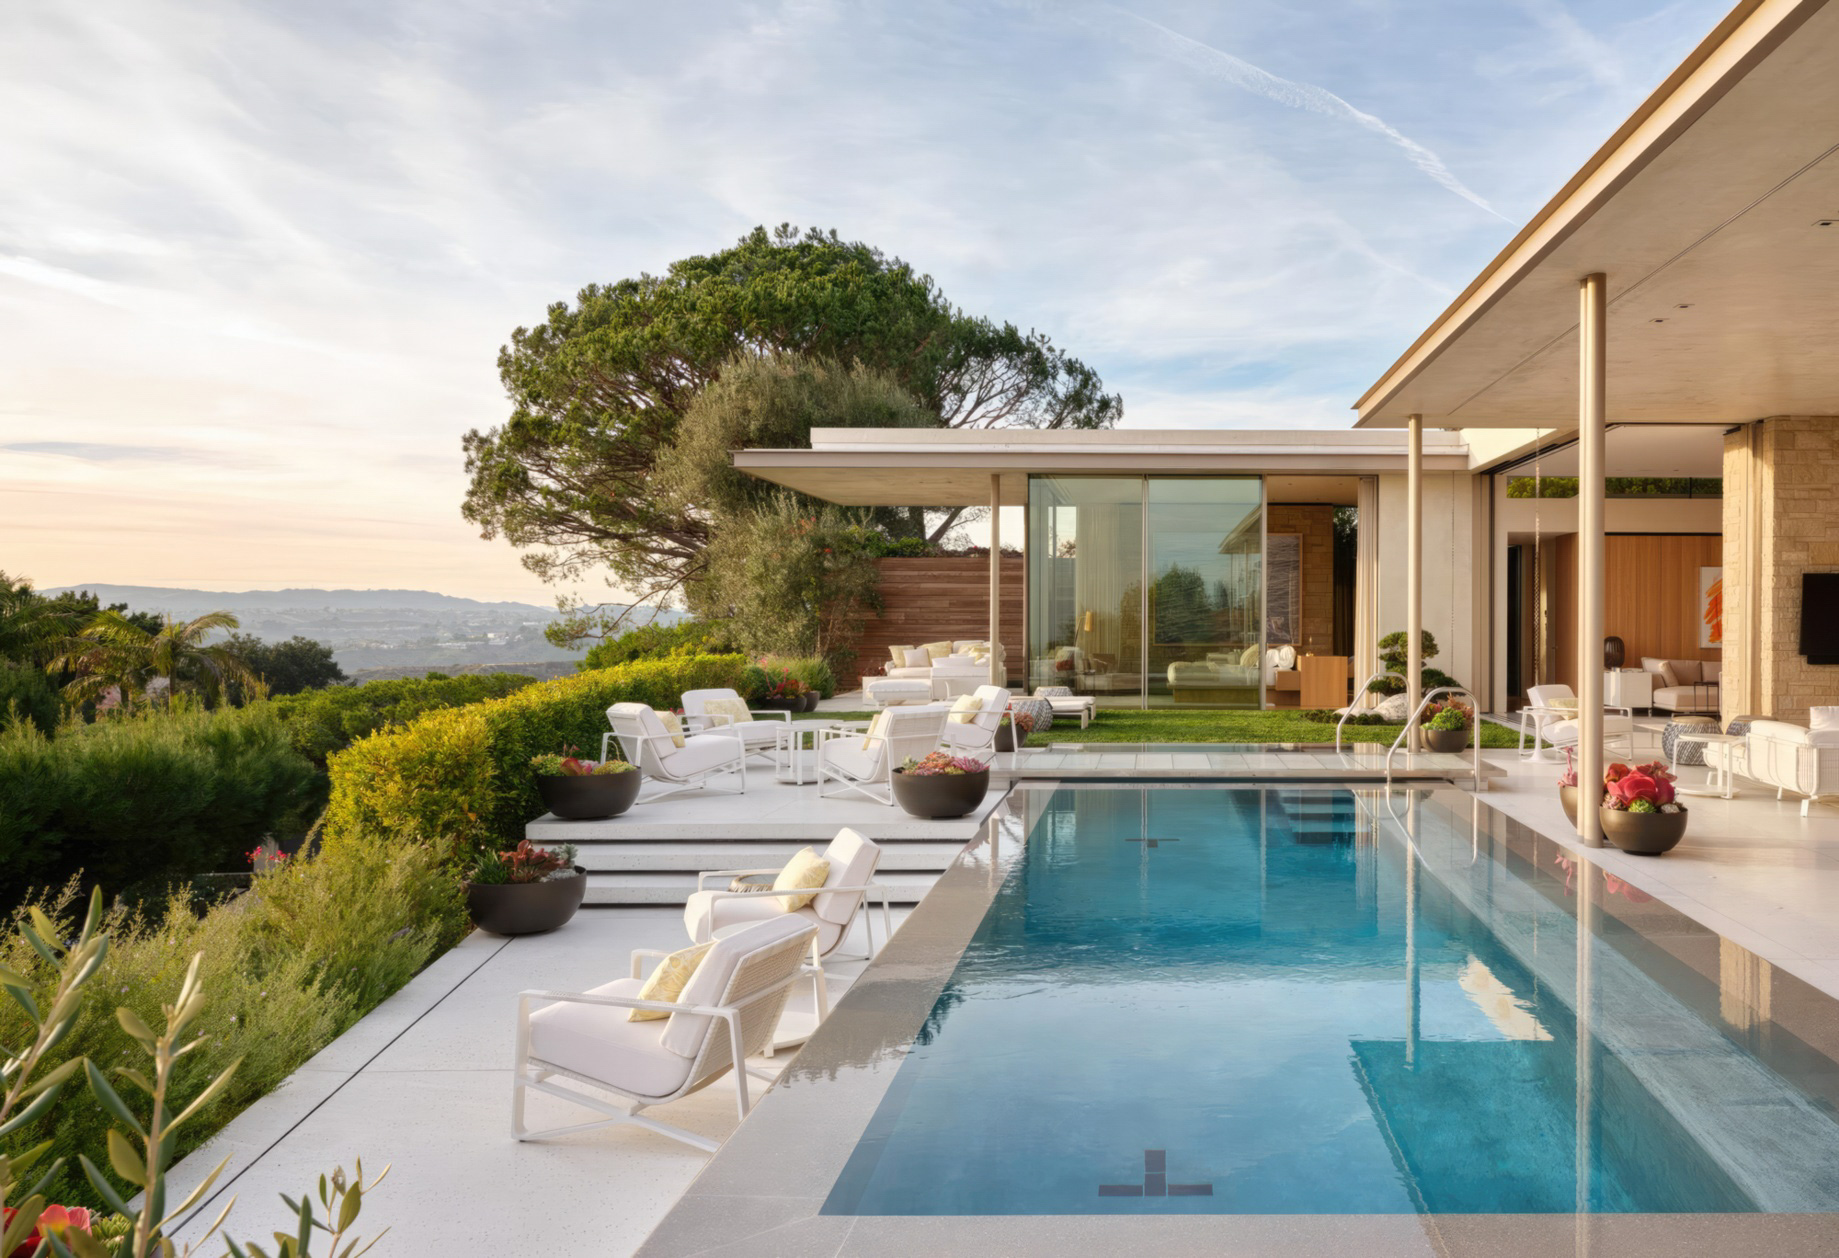 Lori Kanter Tritsch and William P. Lauder’s Trousdale Estates Home – Beverly Hills, CA, USA – 2